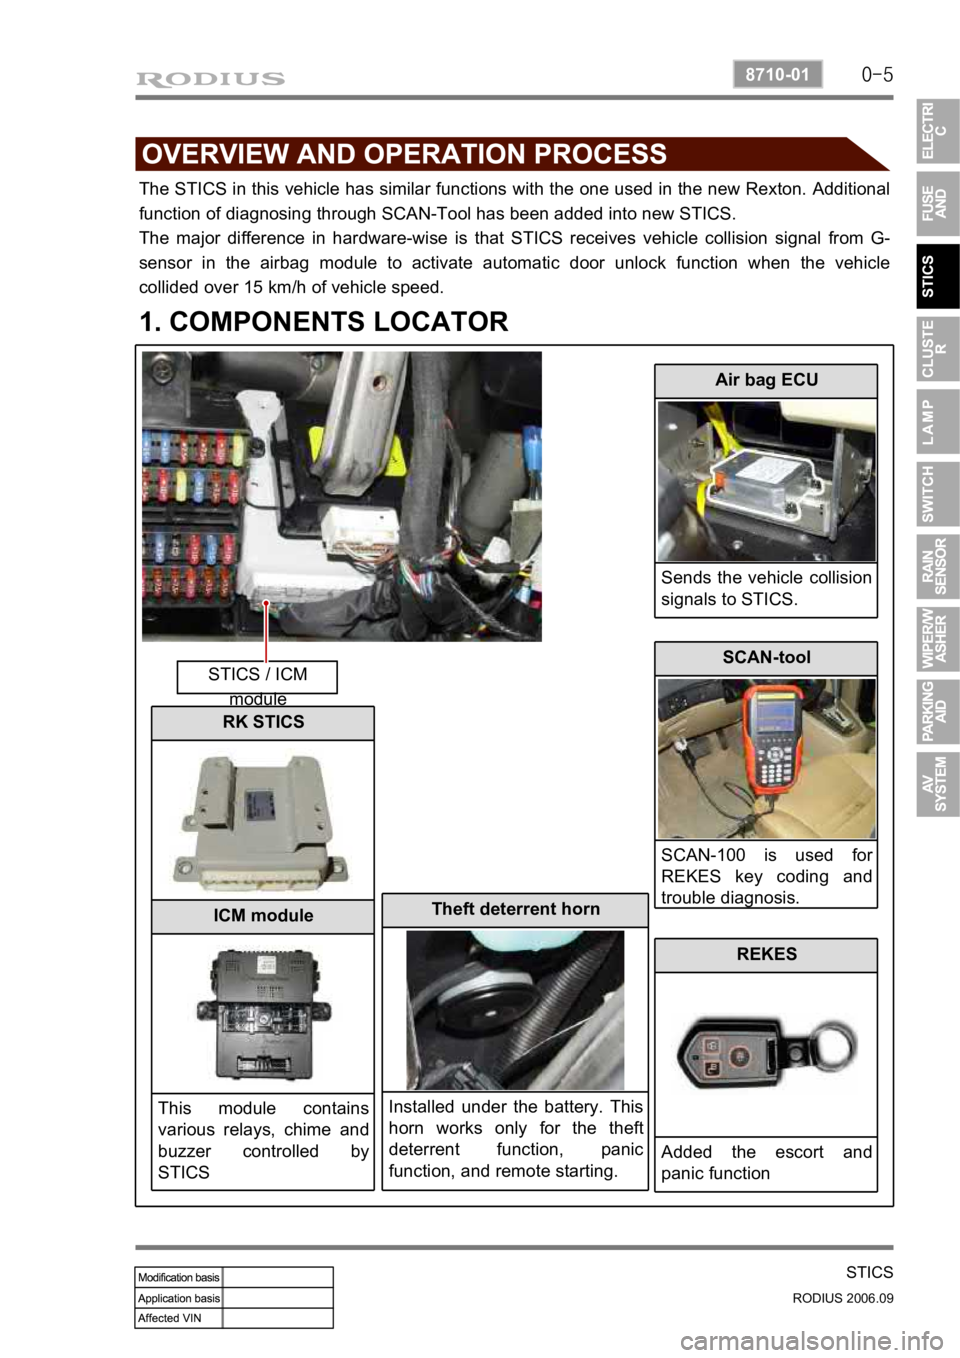 SSANGYONG RODIUS 2007  Service Manual 0-5
STICS
RODIUS 2006.09
8710-01
The STICS in this vehicle has similar functions with the one used in the new Rexton. Additional  
function of diagnosing through SCAN-Tool has been added into new STIC